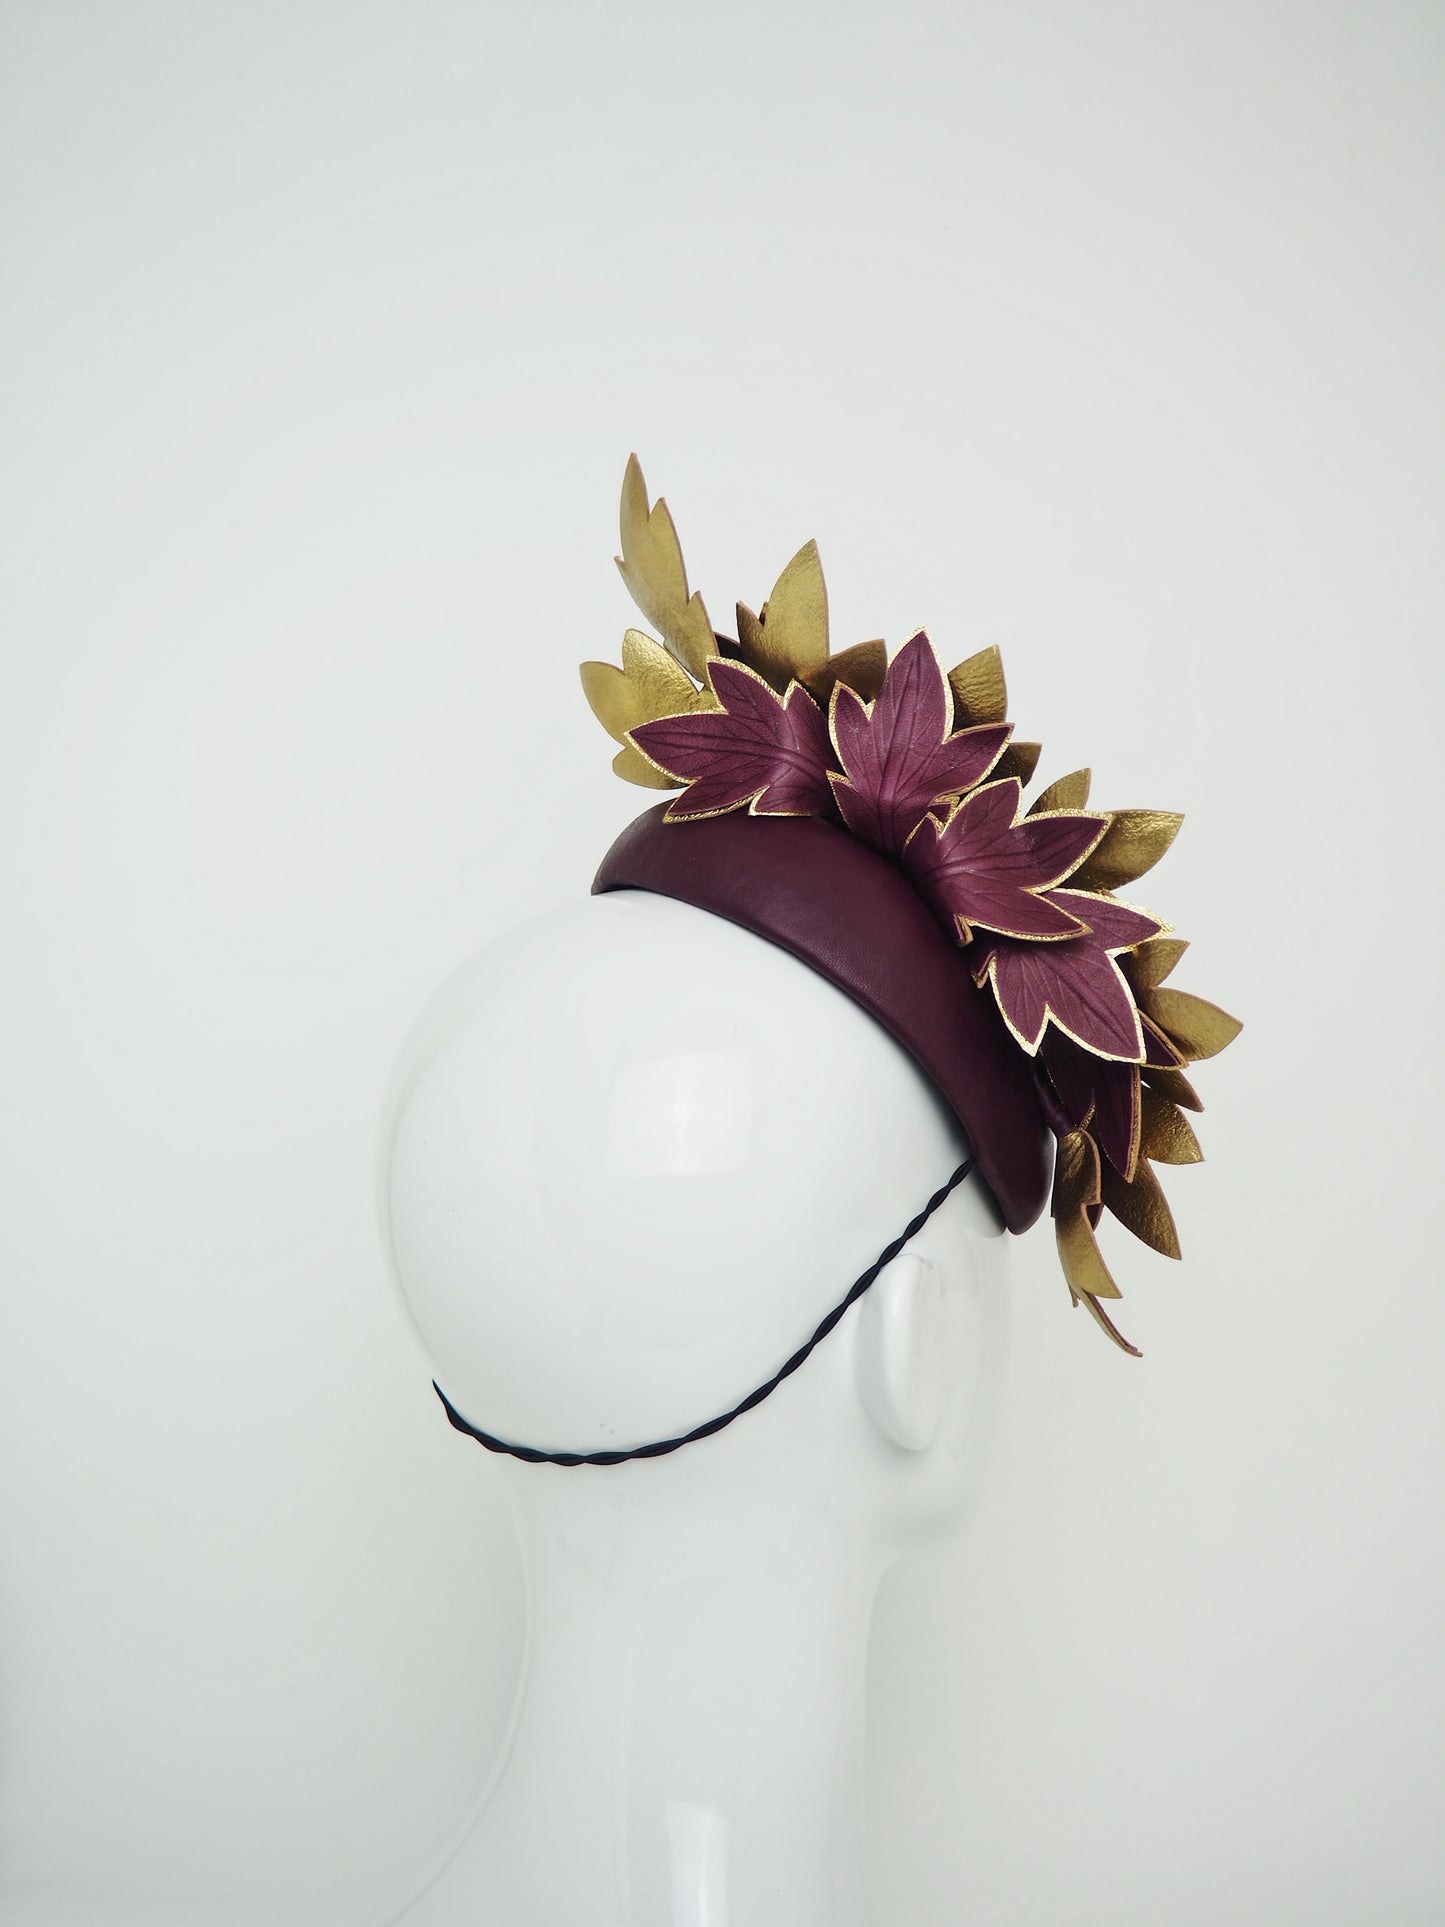 Maroon Maven - Small maroon base with maroon and gold leaves